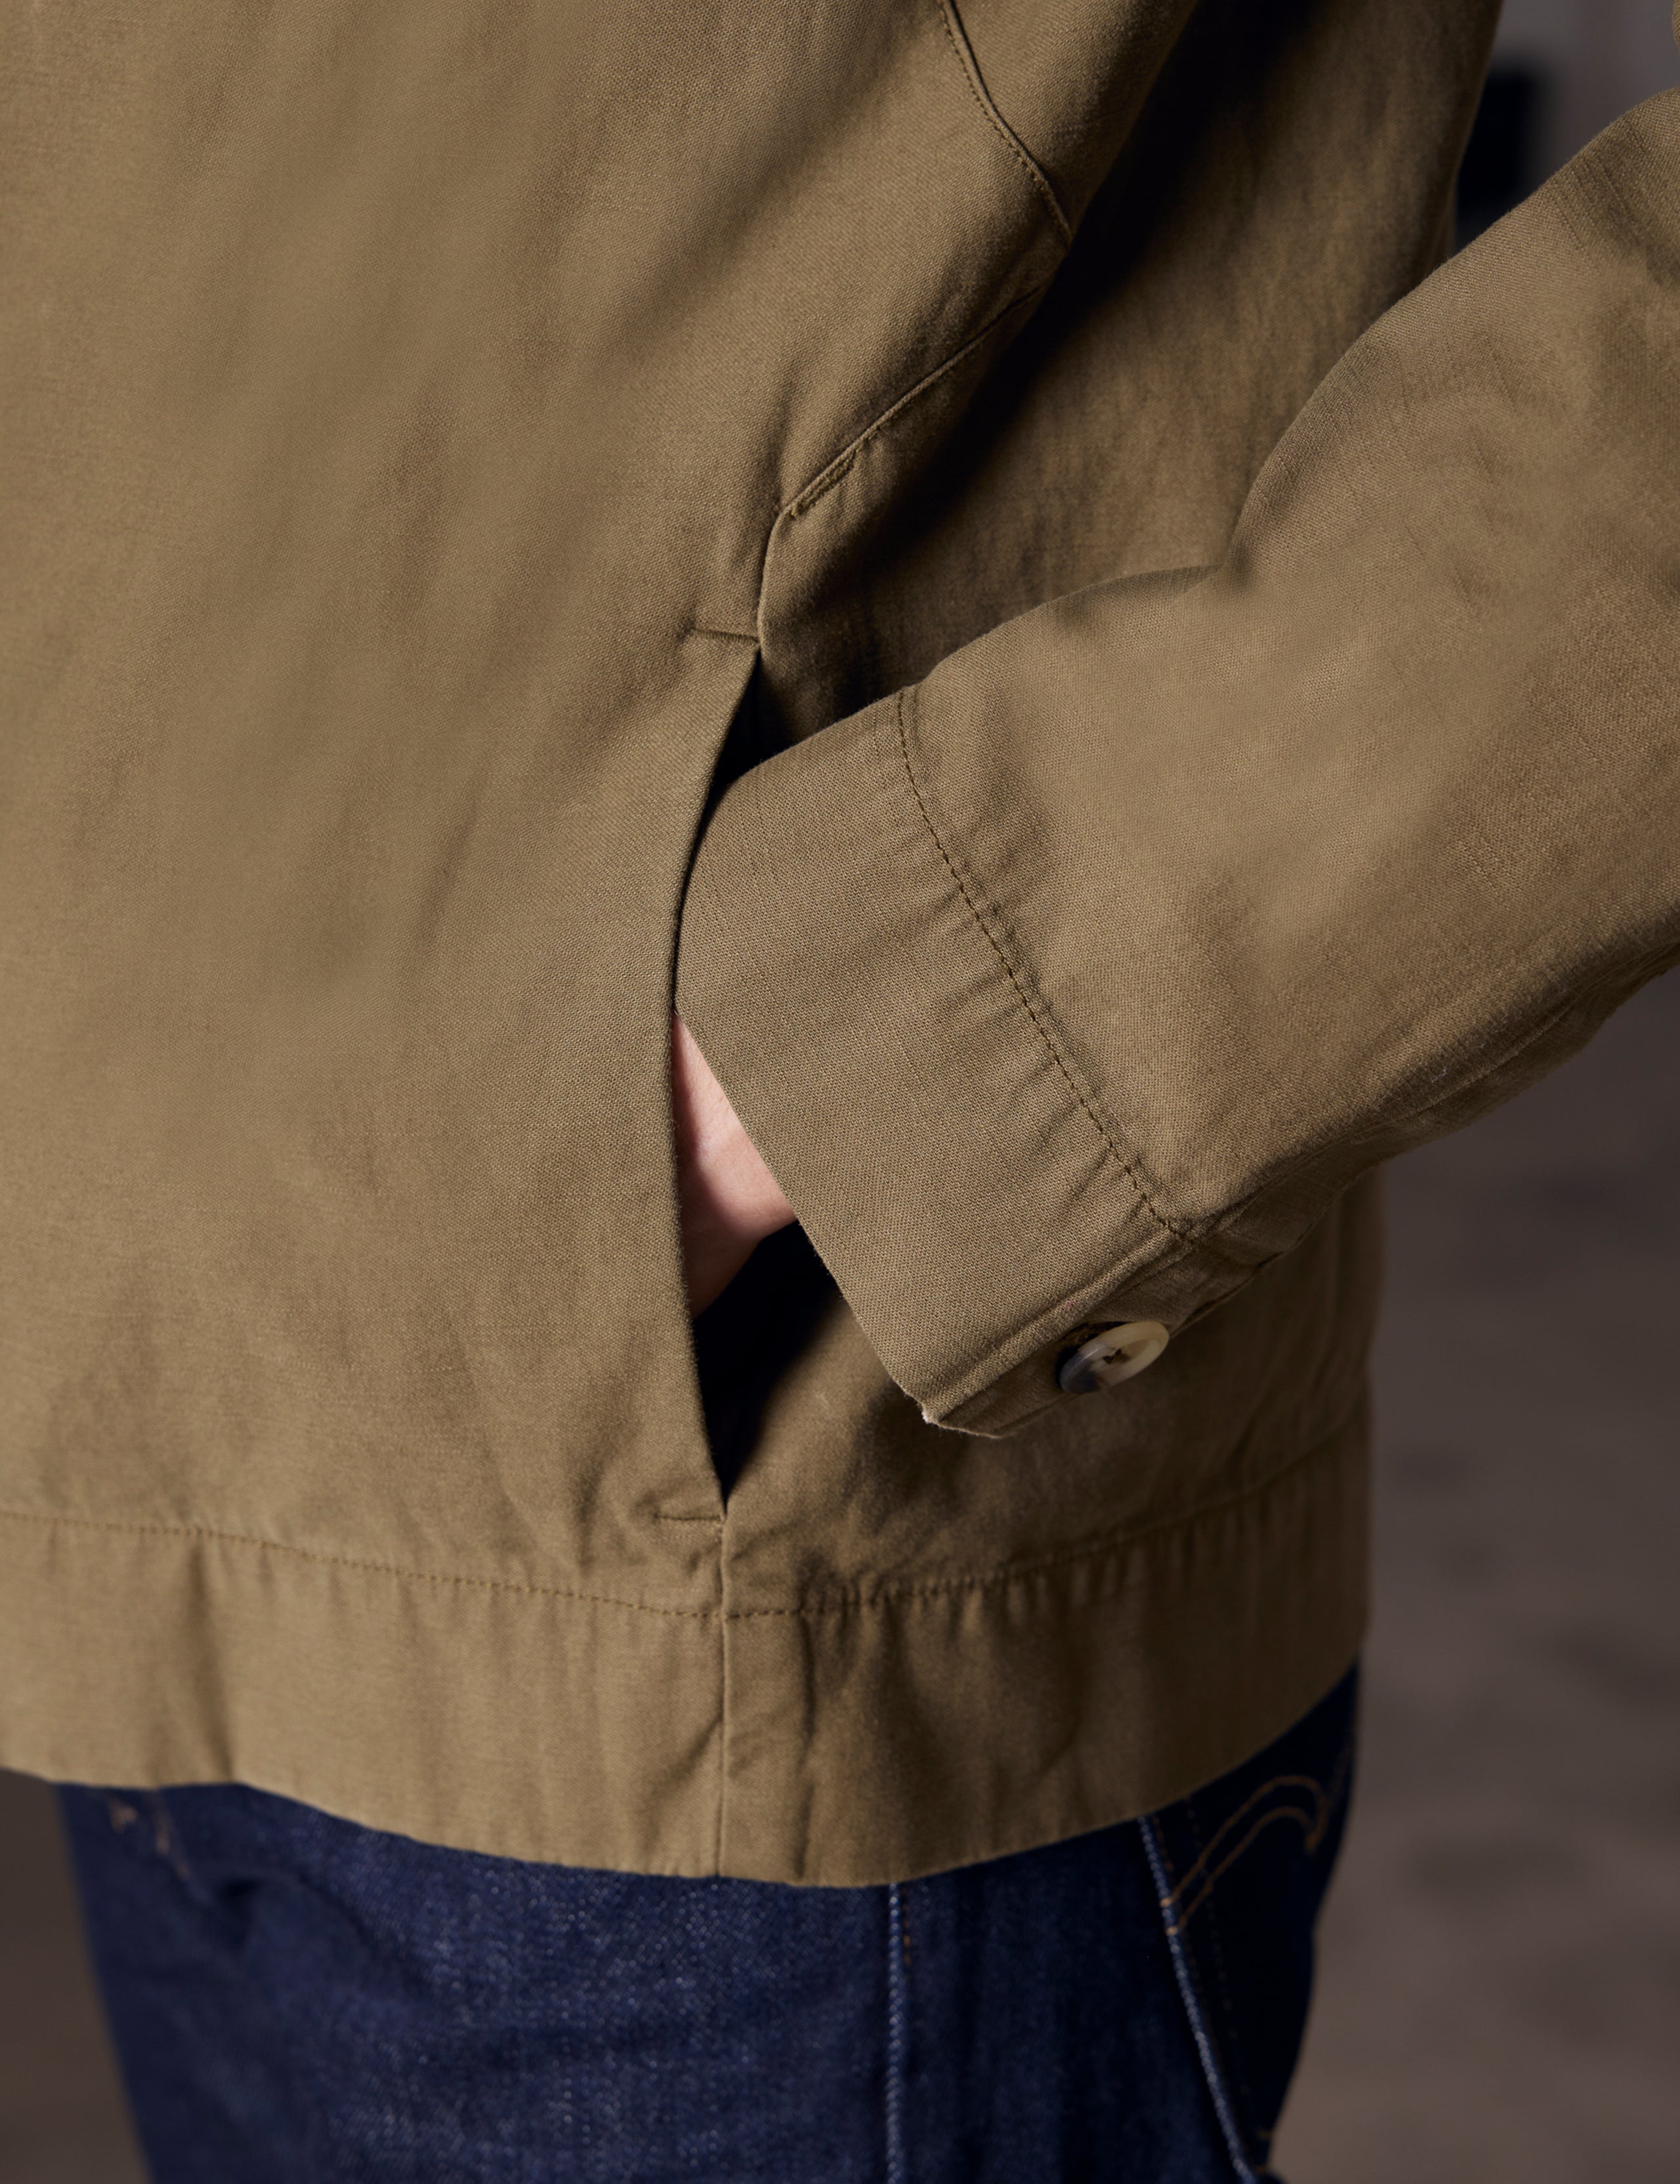 Pocket close-up of green shirt jacket from AETHER Apparel